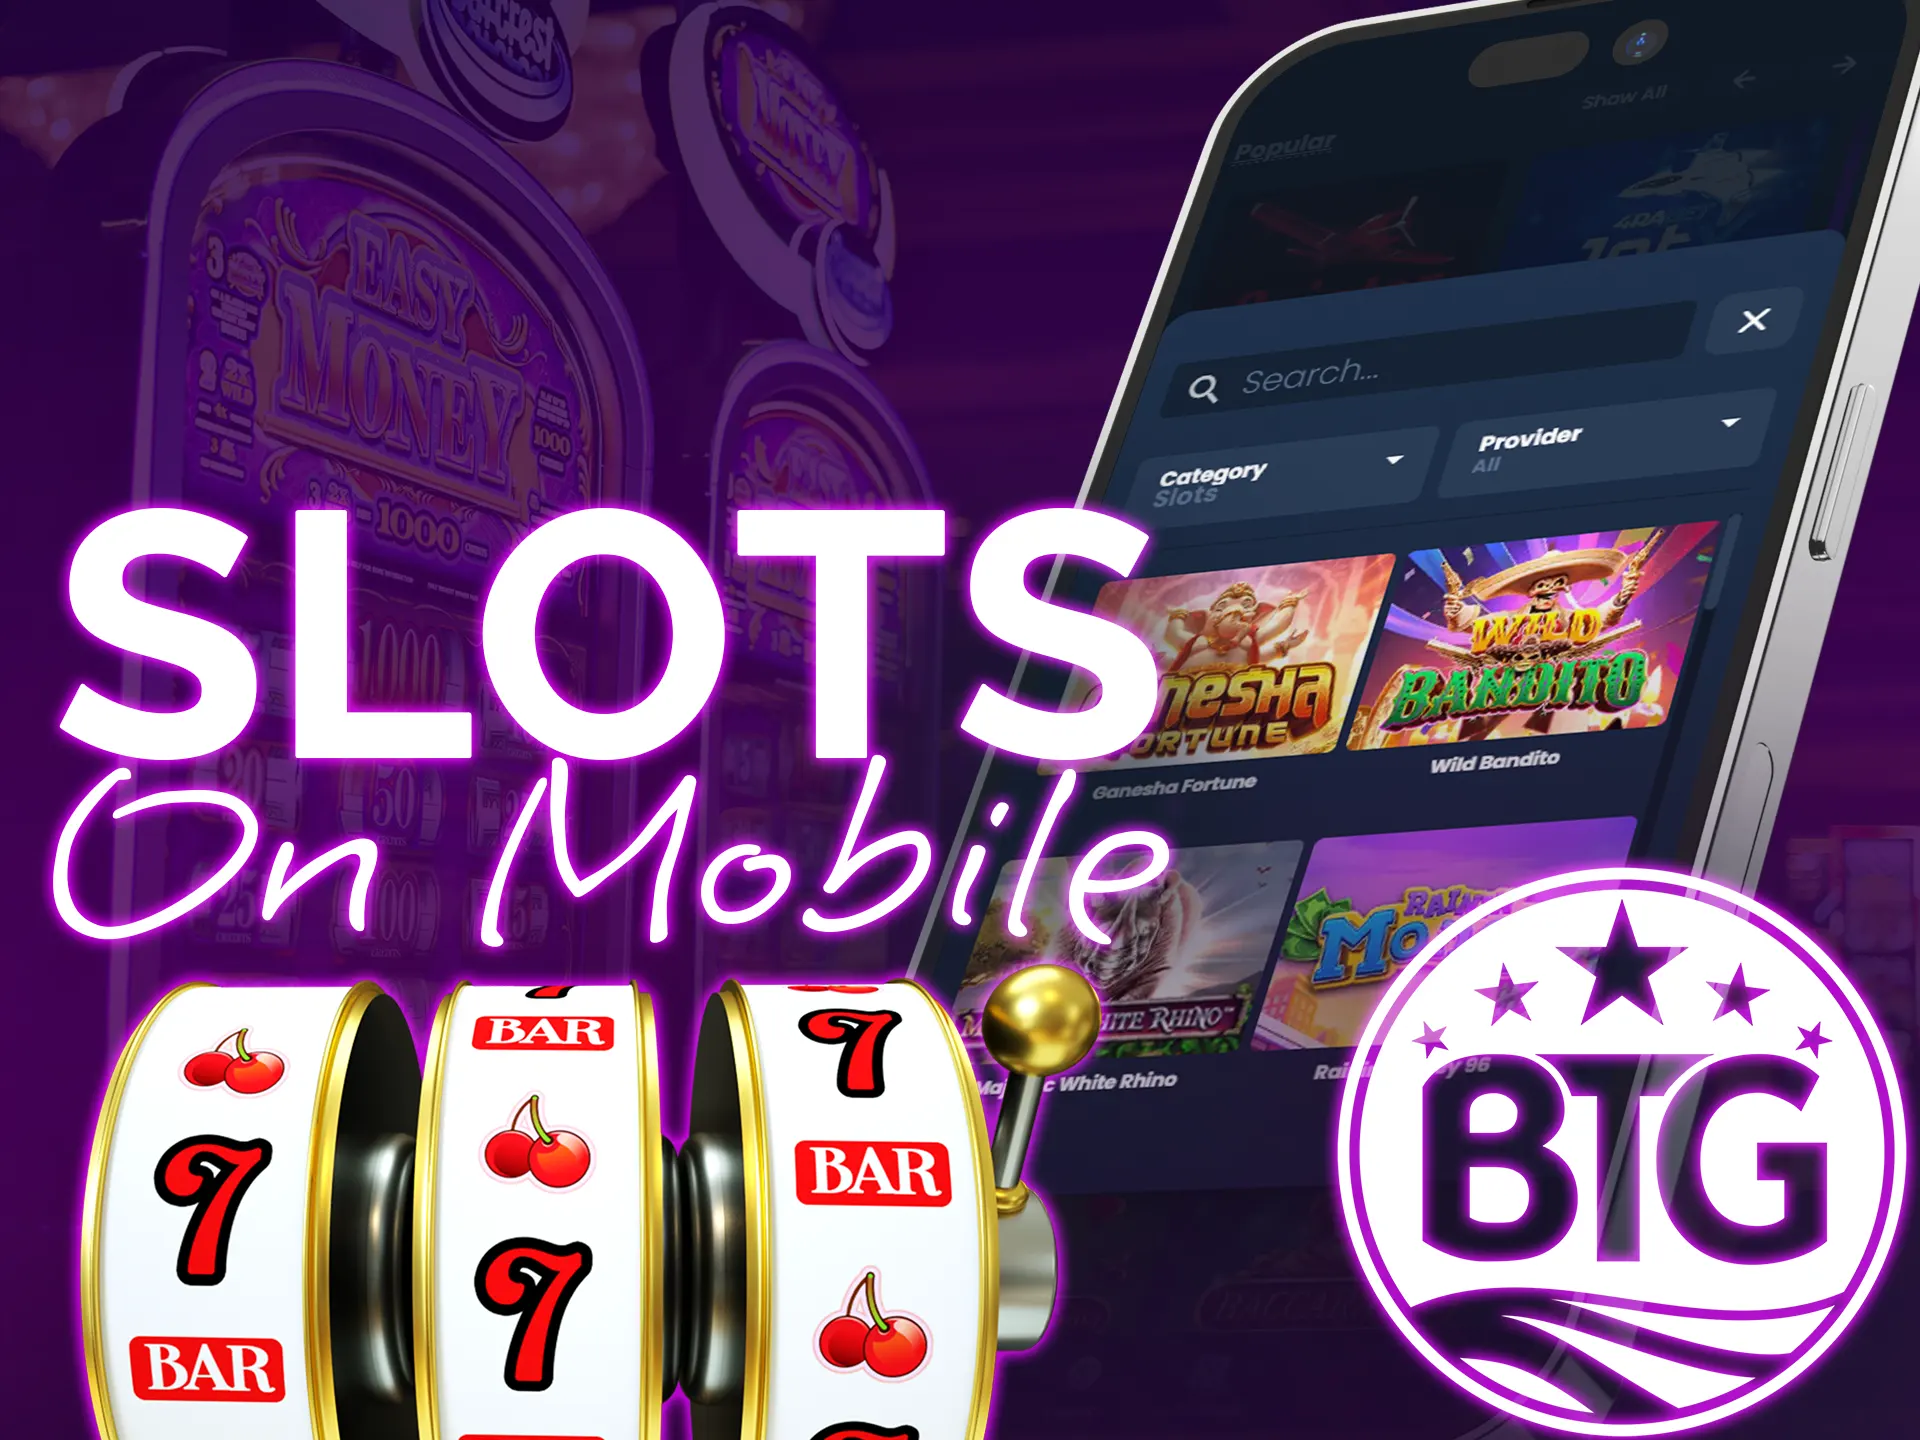 Take the opportunity to play Big Time Gaming slots from mobile devices.